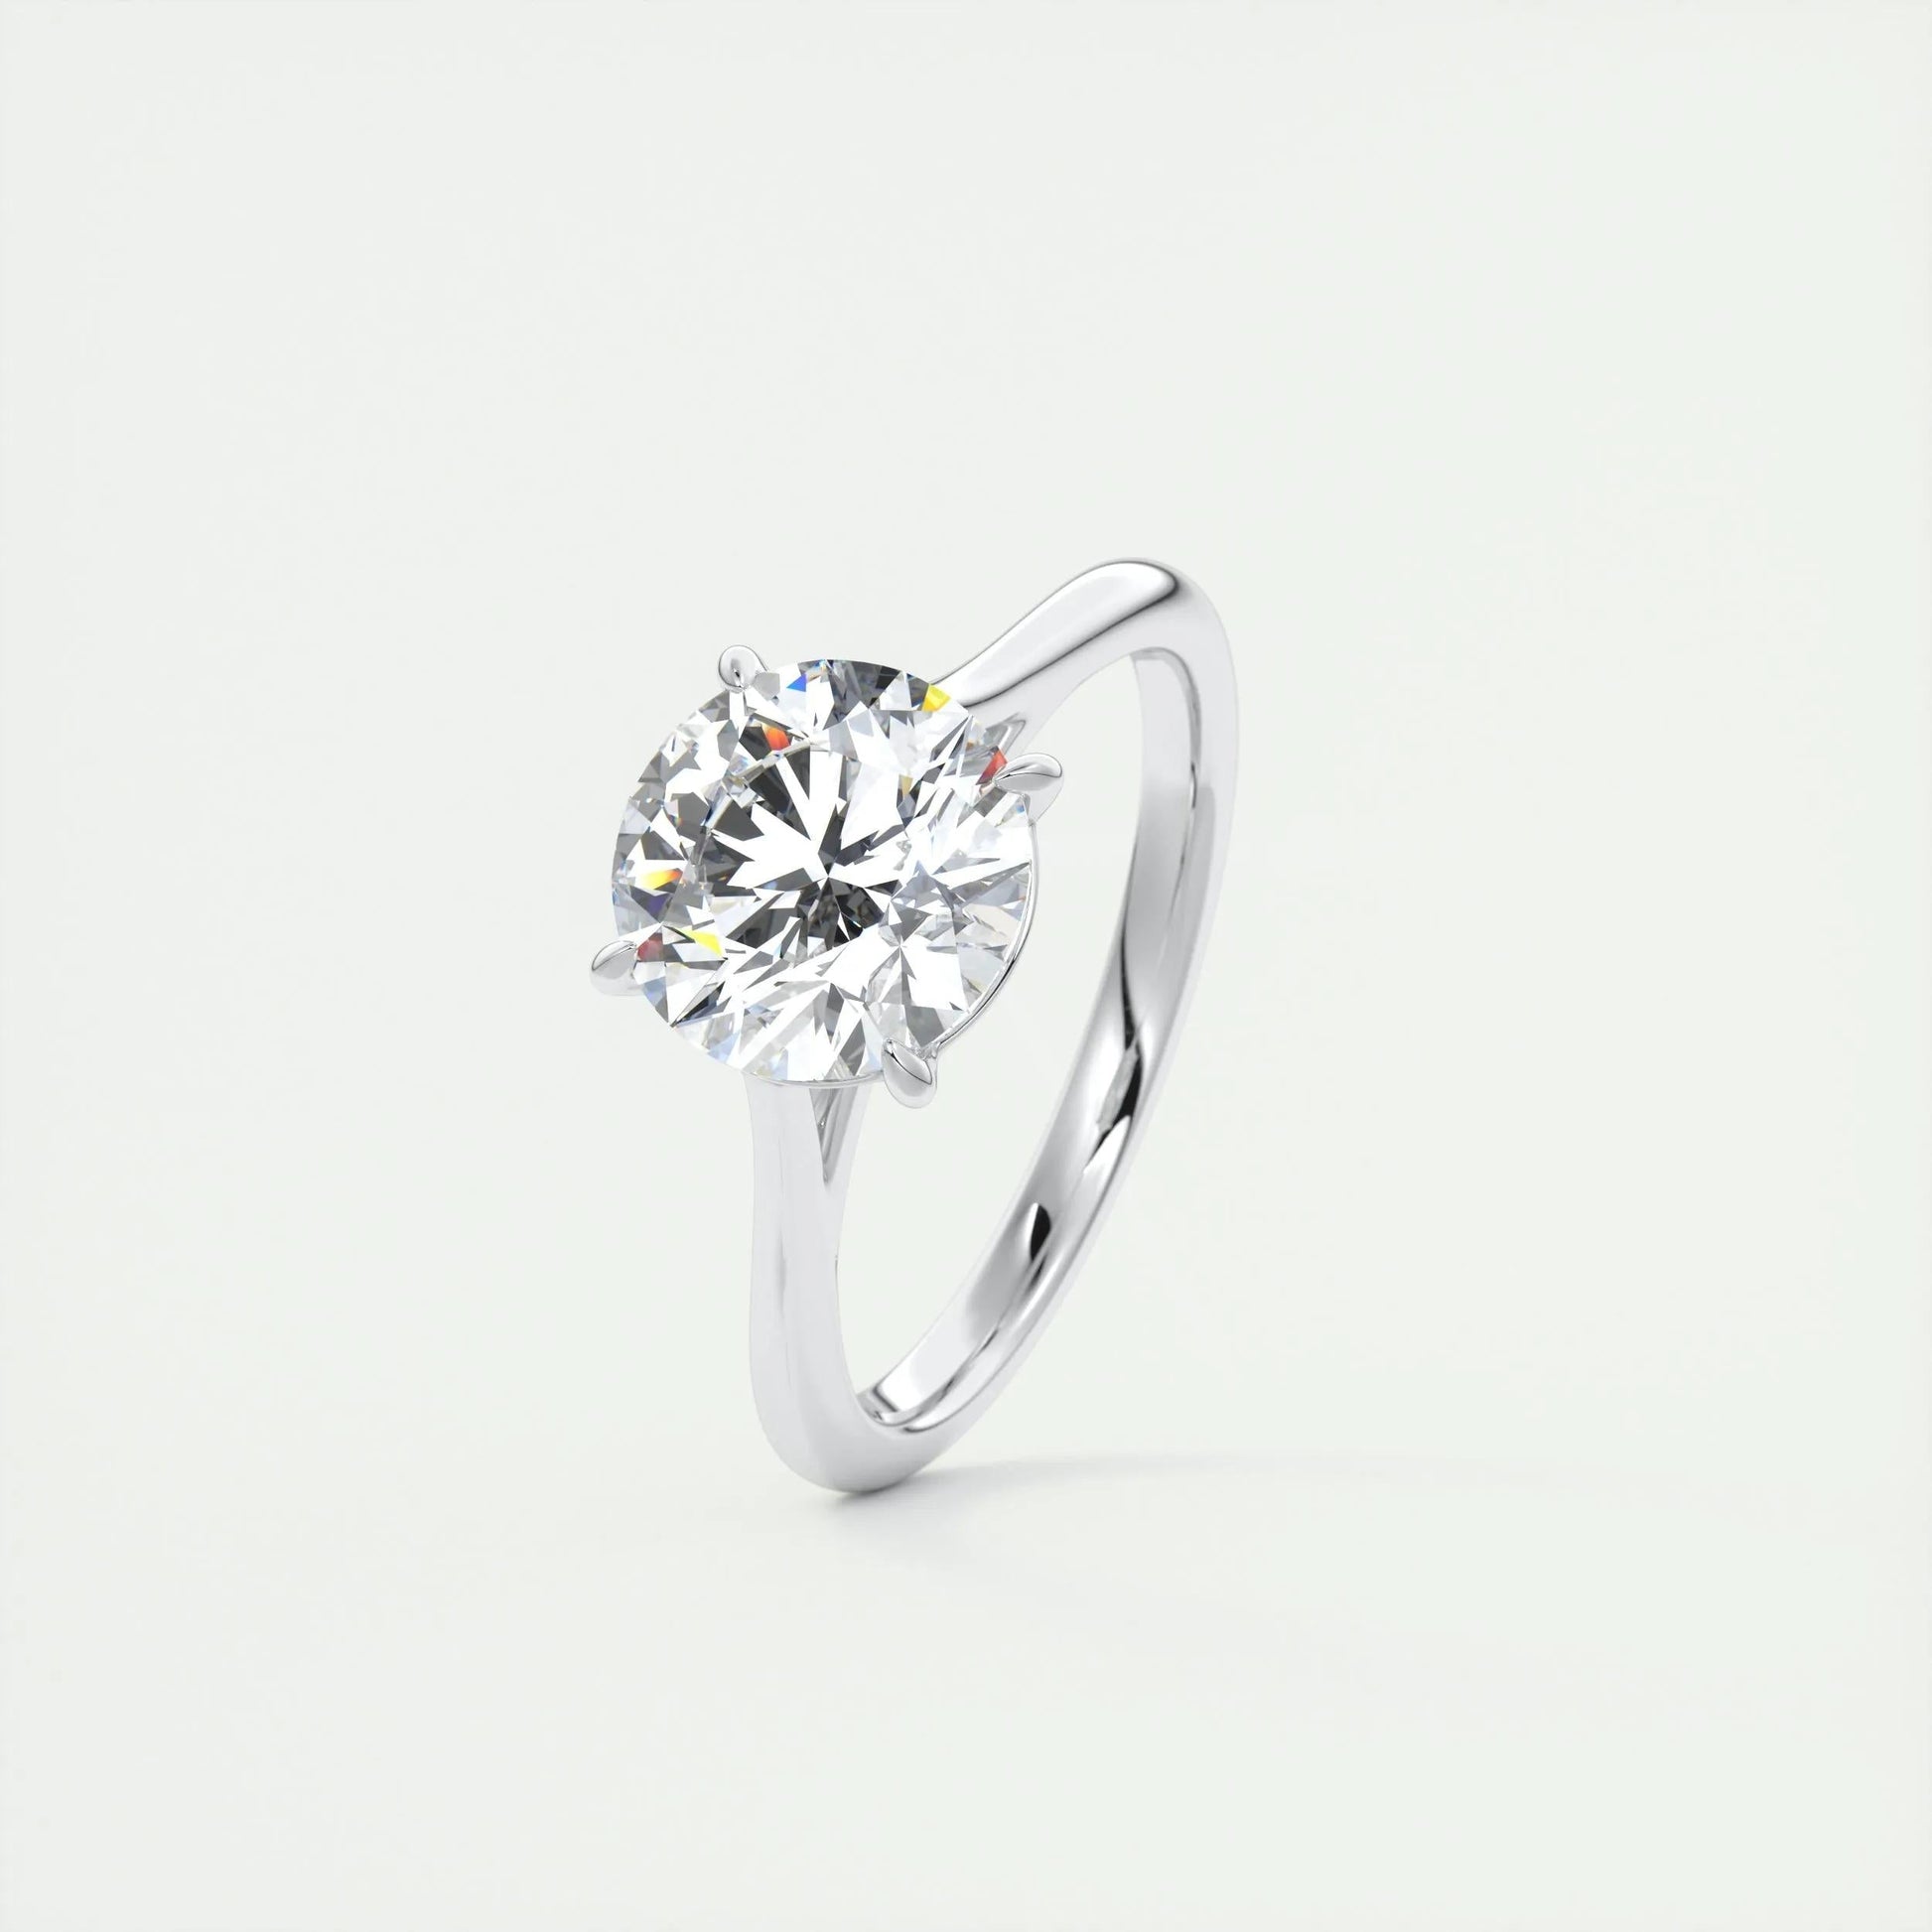 2.0 CT Round Cut Solitaire Moissanite Engagement Ring 4